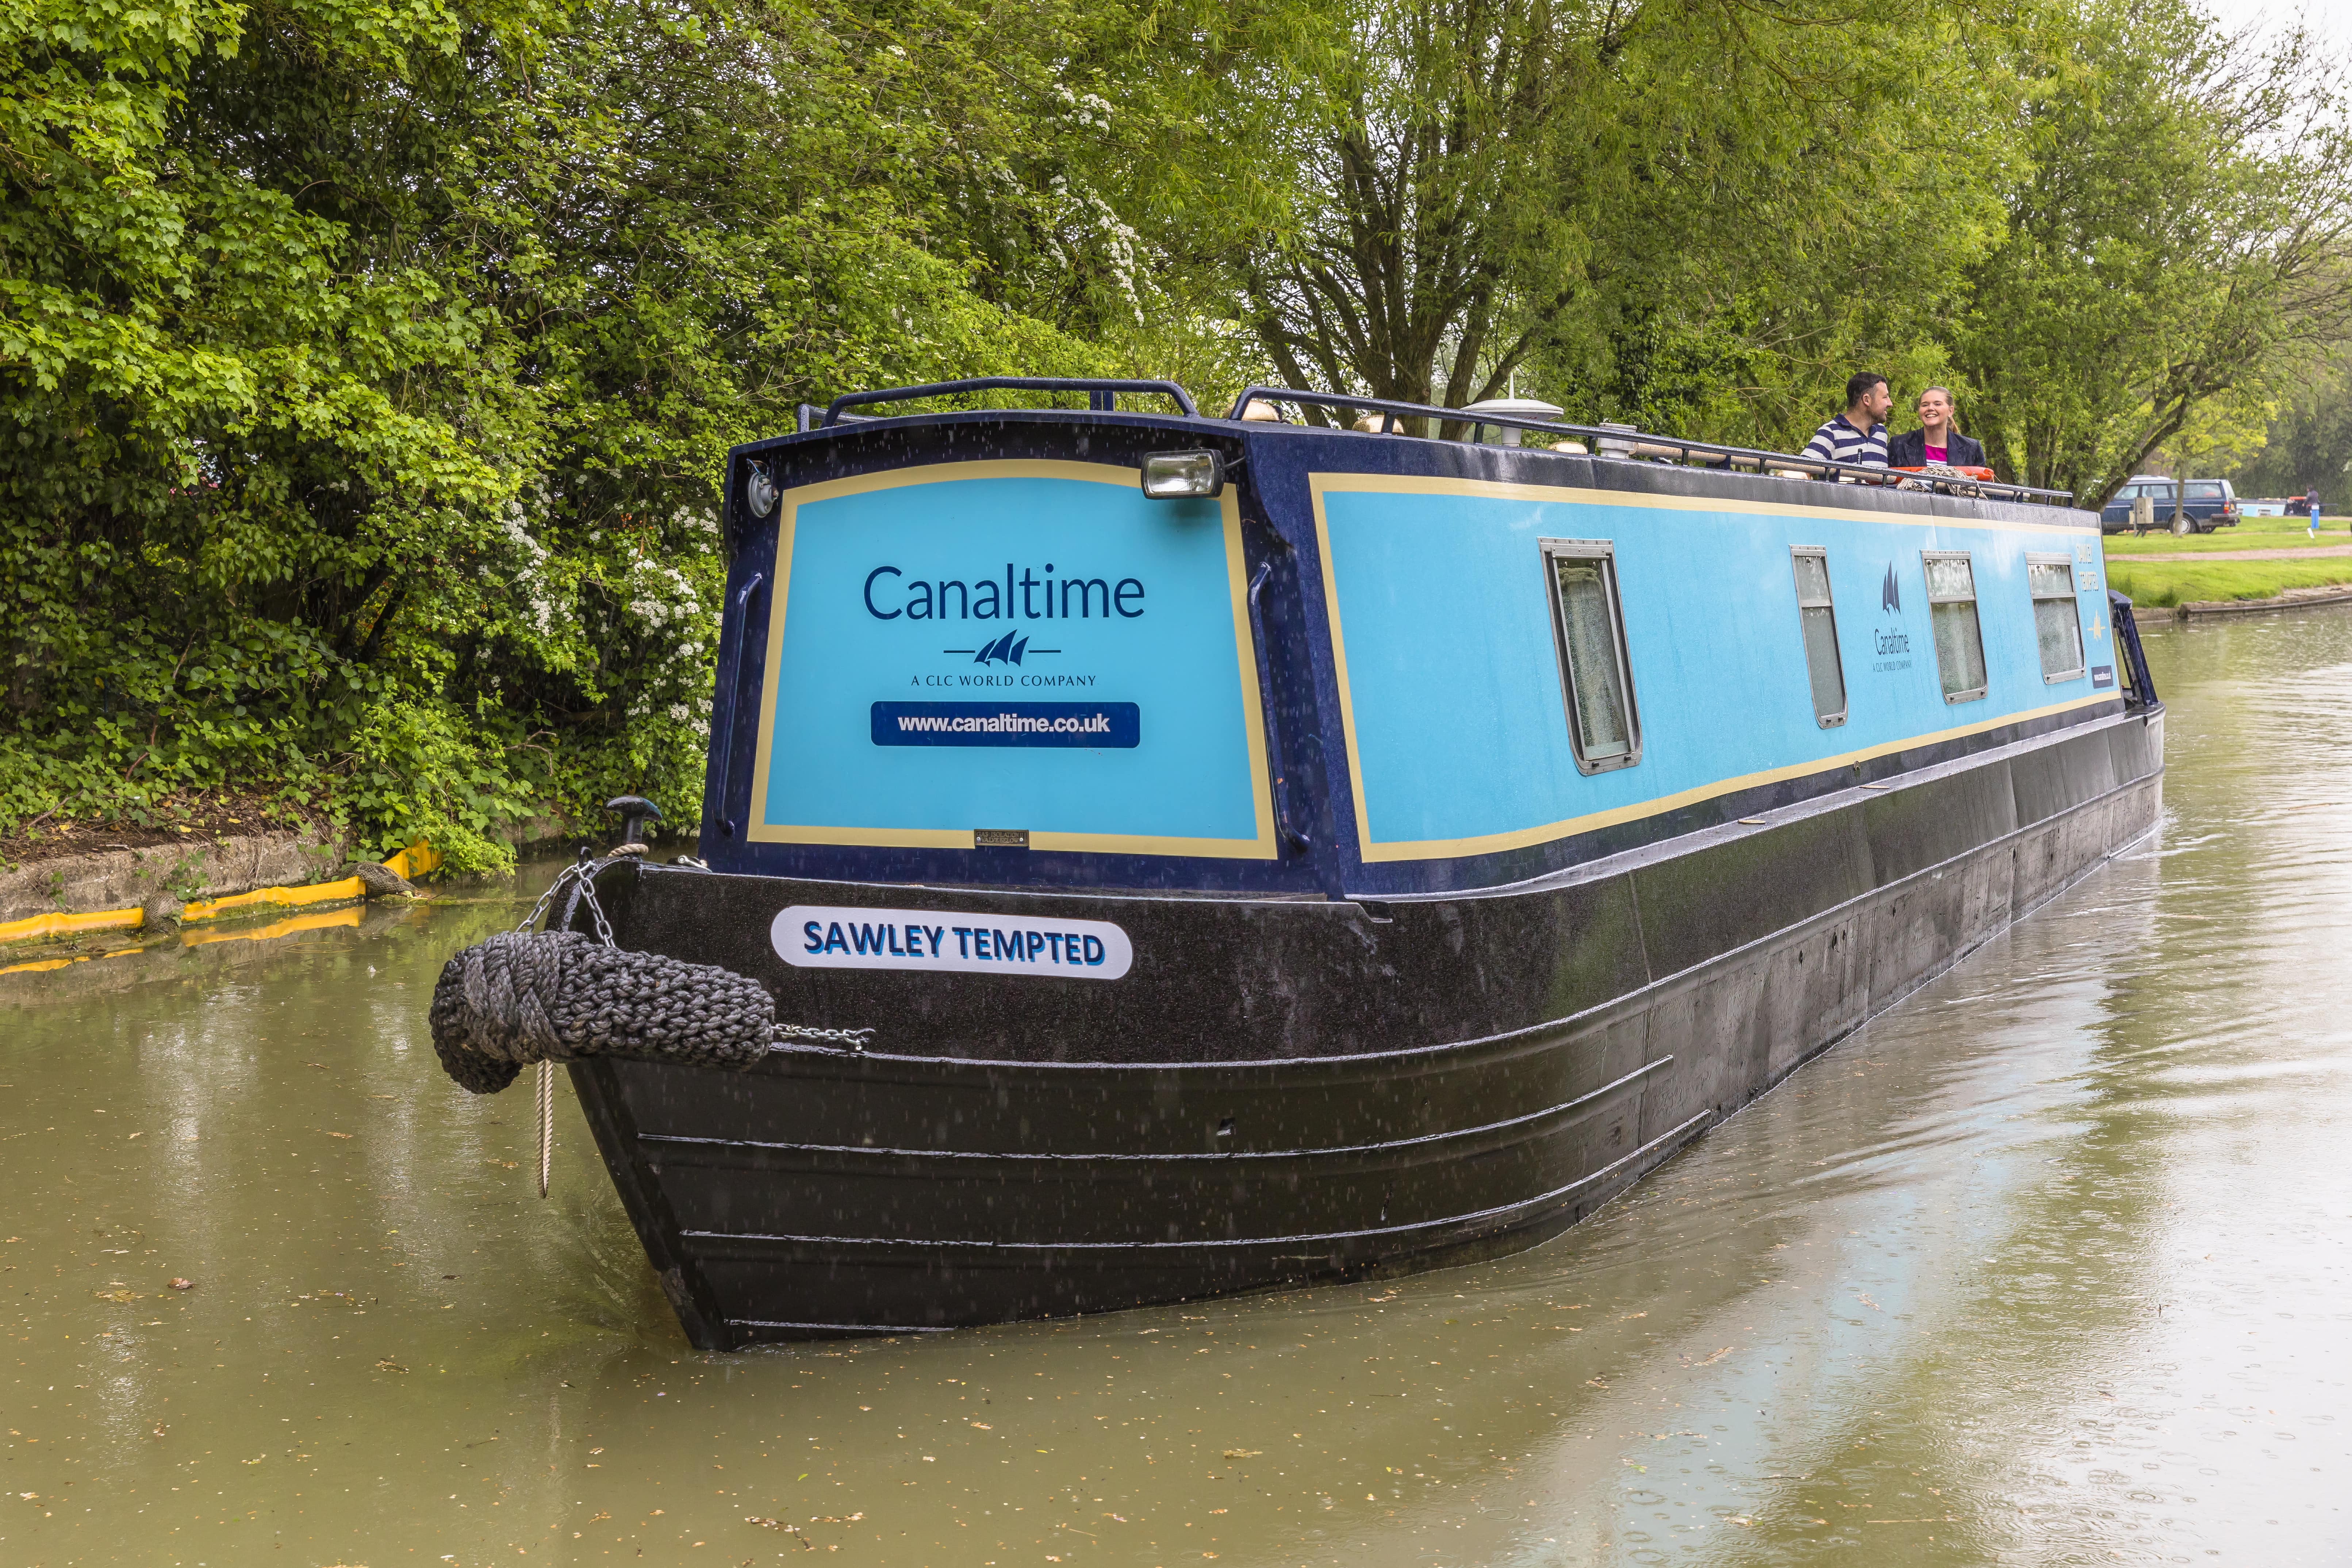 The CLC4 class canal boat